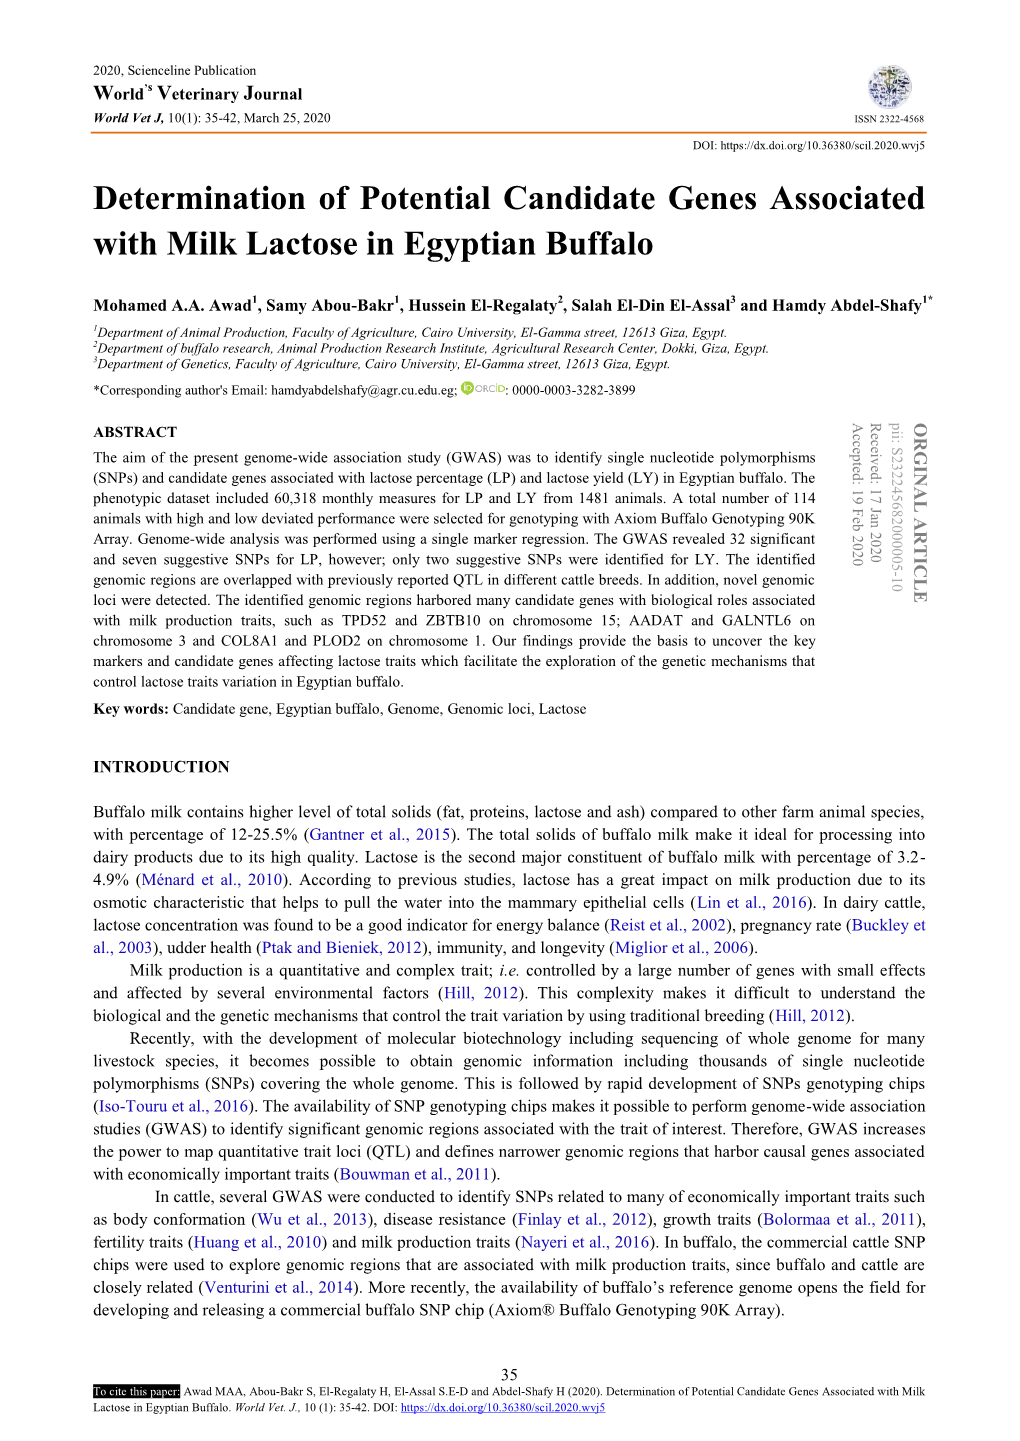 Determination of Potential Candidate Genes Associated with Milk Lactose in Egyptian Buffalo